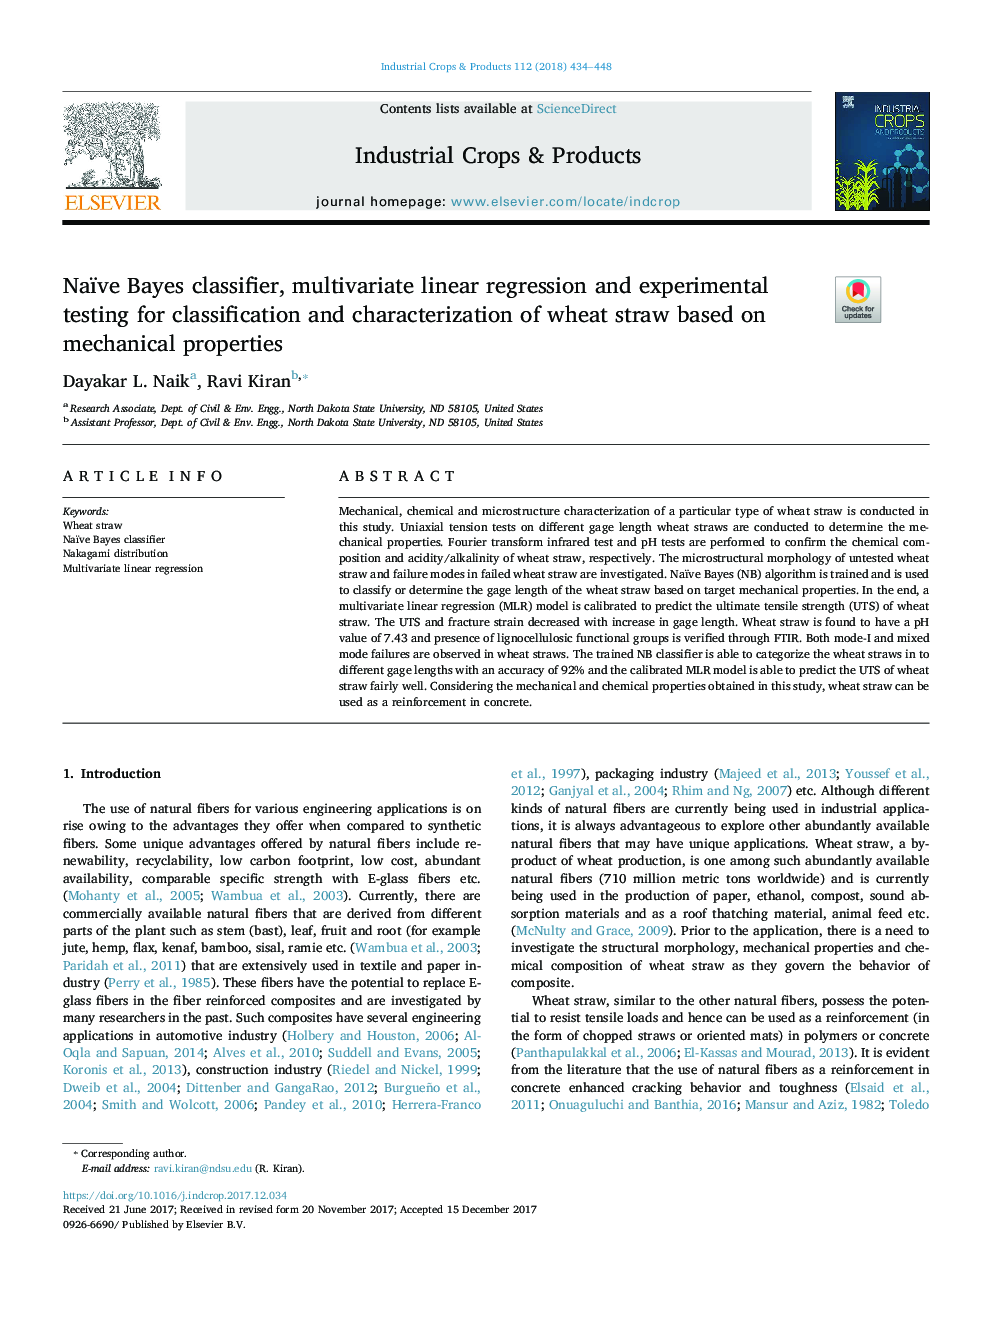 Naïve Bayes classifier, multivariate linear regression and experimental testing for classification and characterization of wheat straw based on mechanical properties